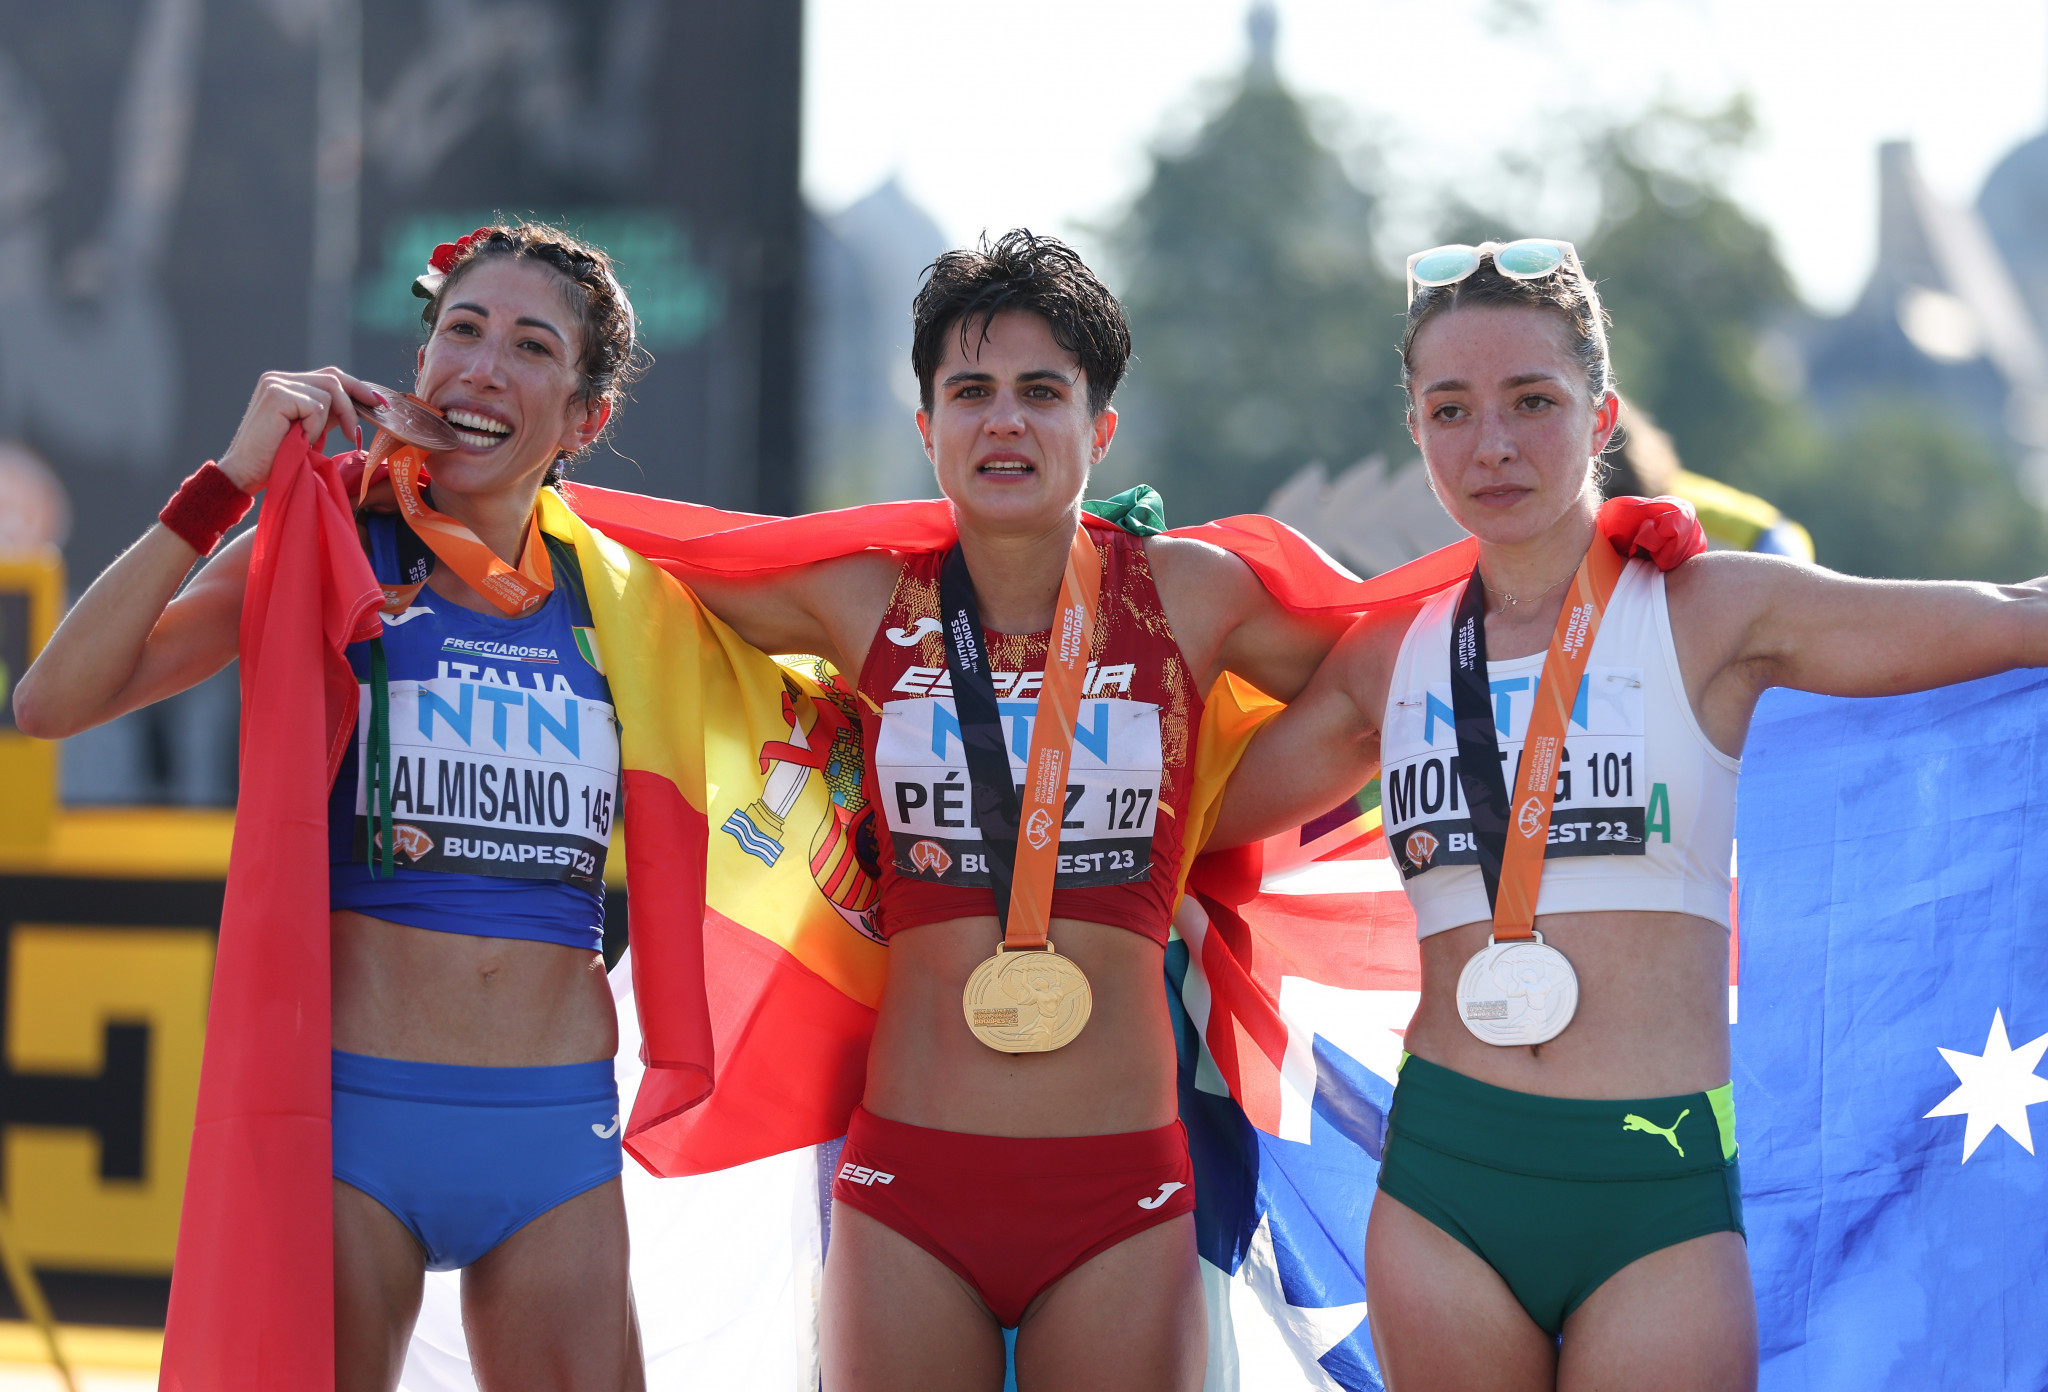 Australia's Jemima Montag, right, and Italy's Antonella Palmisano, left, took silver and bronze respectively in the women's 20km race walk ©Getty Images